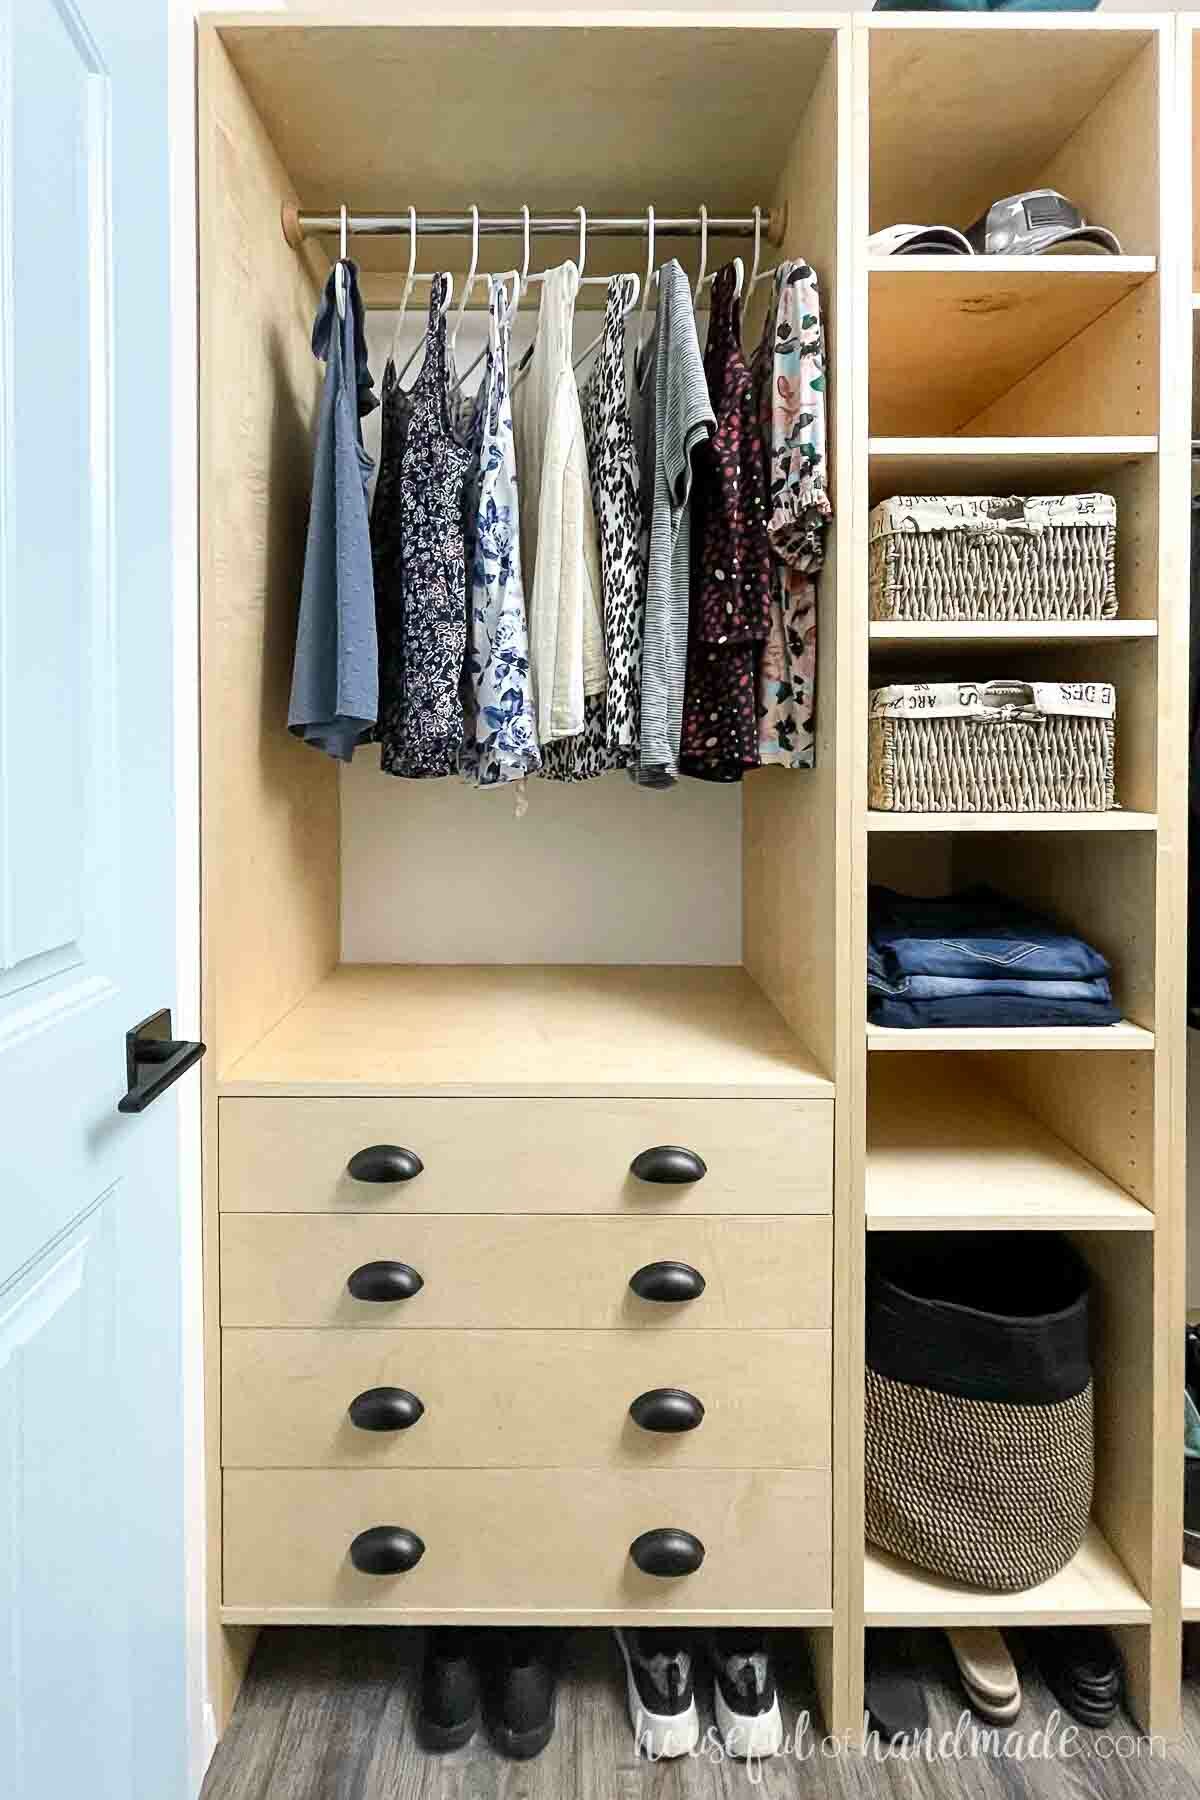 Two sections of the closet organizer cabinets, one with 4 large drawer and a closet rod and the other with lots of shelves. 